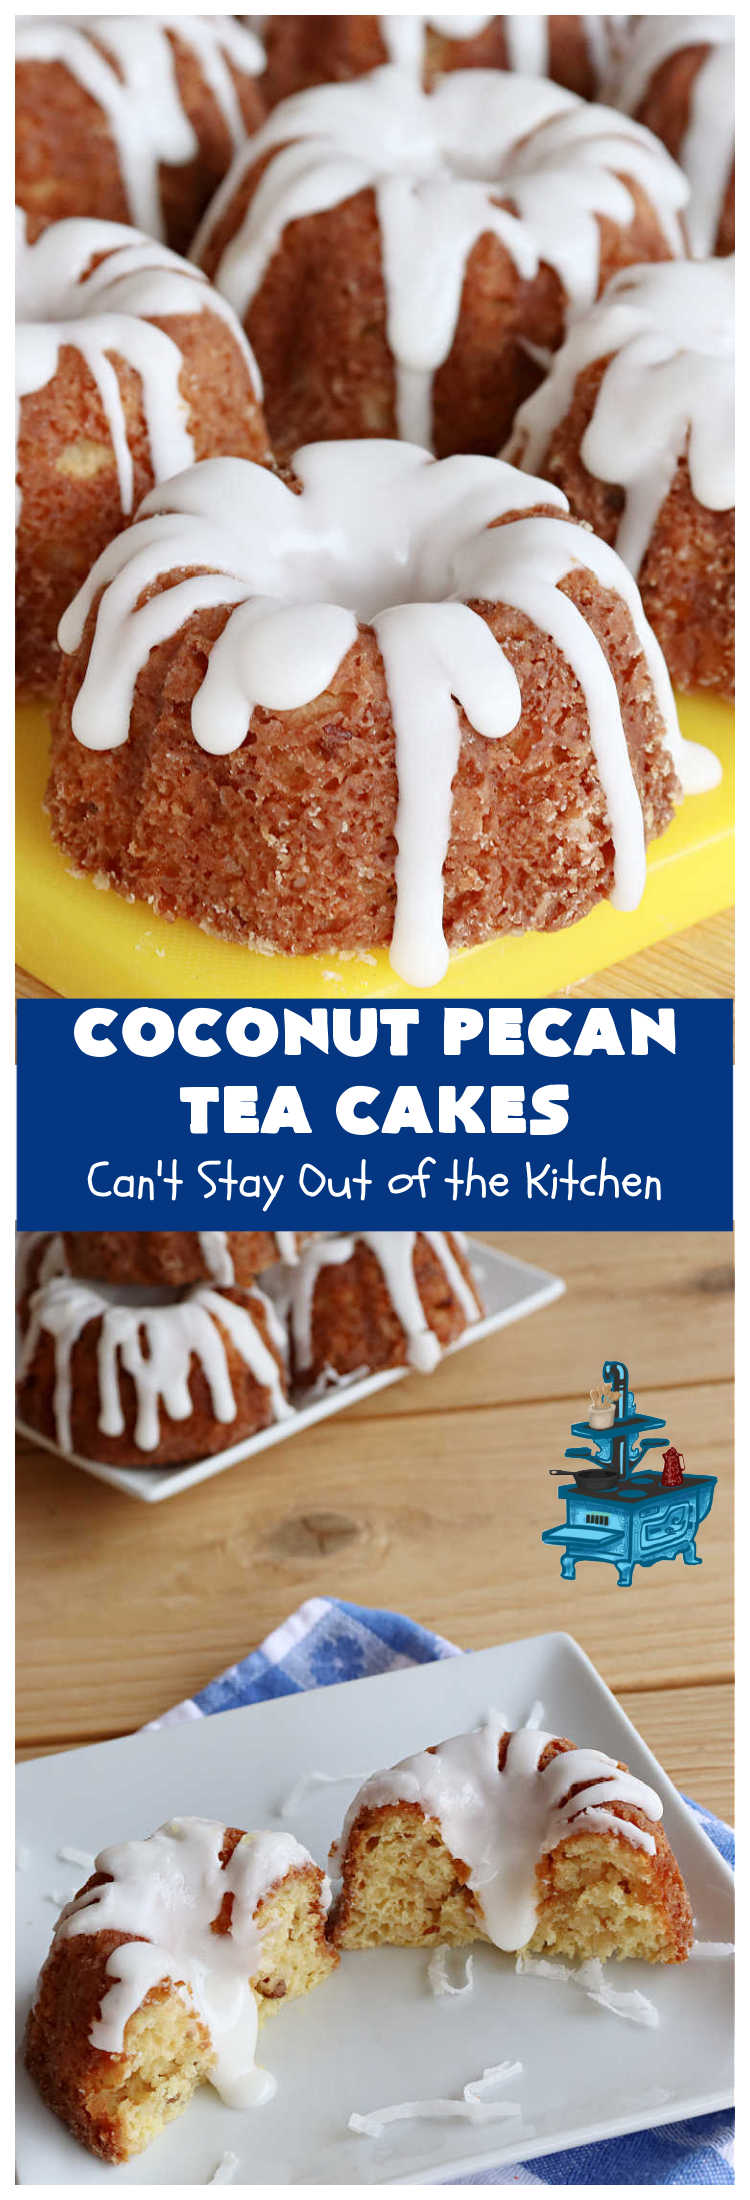 Coconut Pecan Tea Cakes | Can't Stay Out of the Kitchen | these adorable #TeaCakes are perfect for family get-togethers or #holiday #baking. If you enjoy #coconut and #pecans these miniature #Bundt #cakes will cure every sweet tooth craving. #cake #dessert #HolidayDessert #CoconutDessert #CoconutPecanTeaCakesCoconut Pecan Tea Cakes | Can't Stay Out of the Kitchen | these adorable #TeaCakes are perfect for family get-togethers or #holiday #baking. If you enjoy #coconut and #pecans these miniature #Bundt #cakes will cure every sweet tooth craving. #cake #dessert #HolidayDessert #CoconutDessert #CoconutPecanTeaCakes